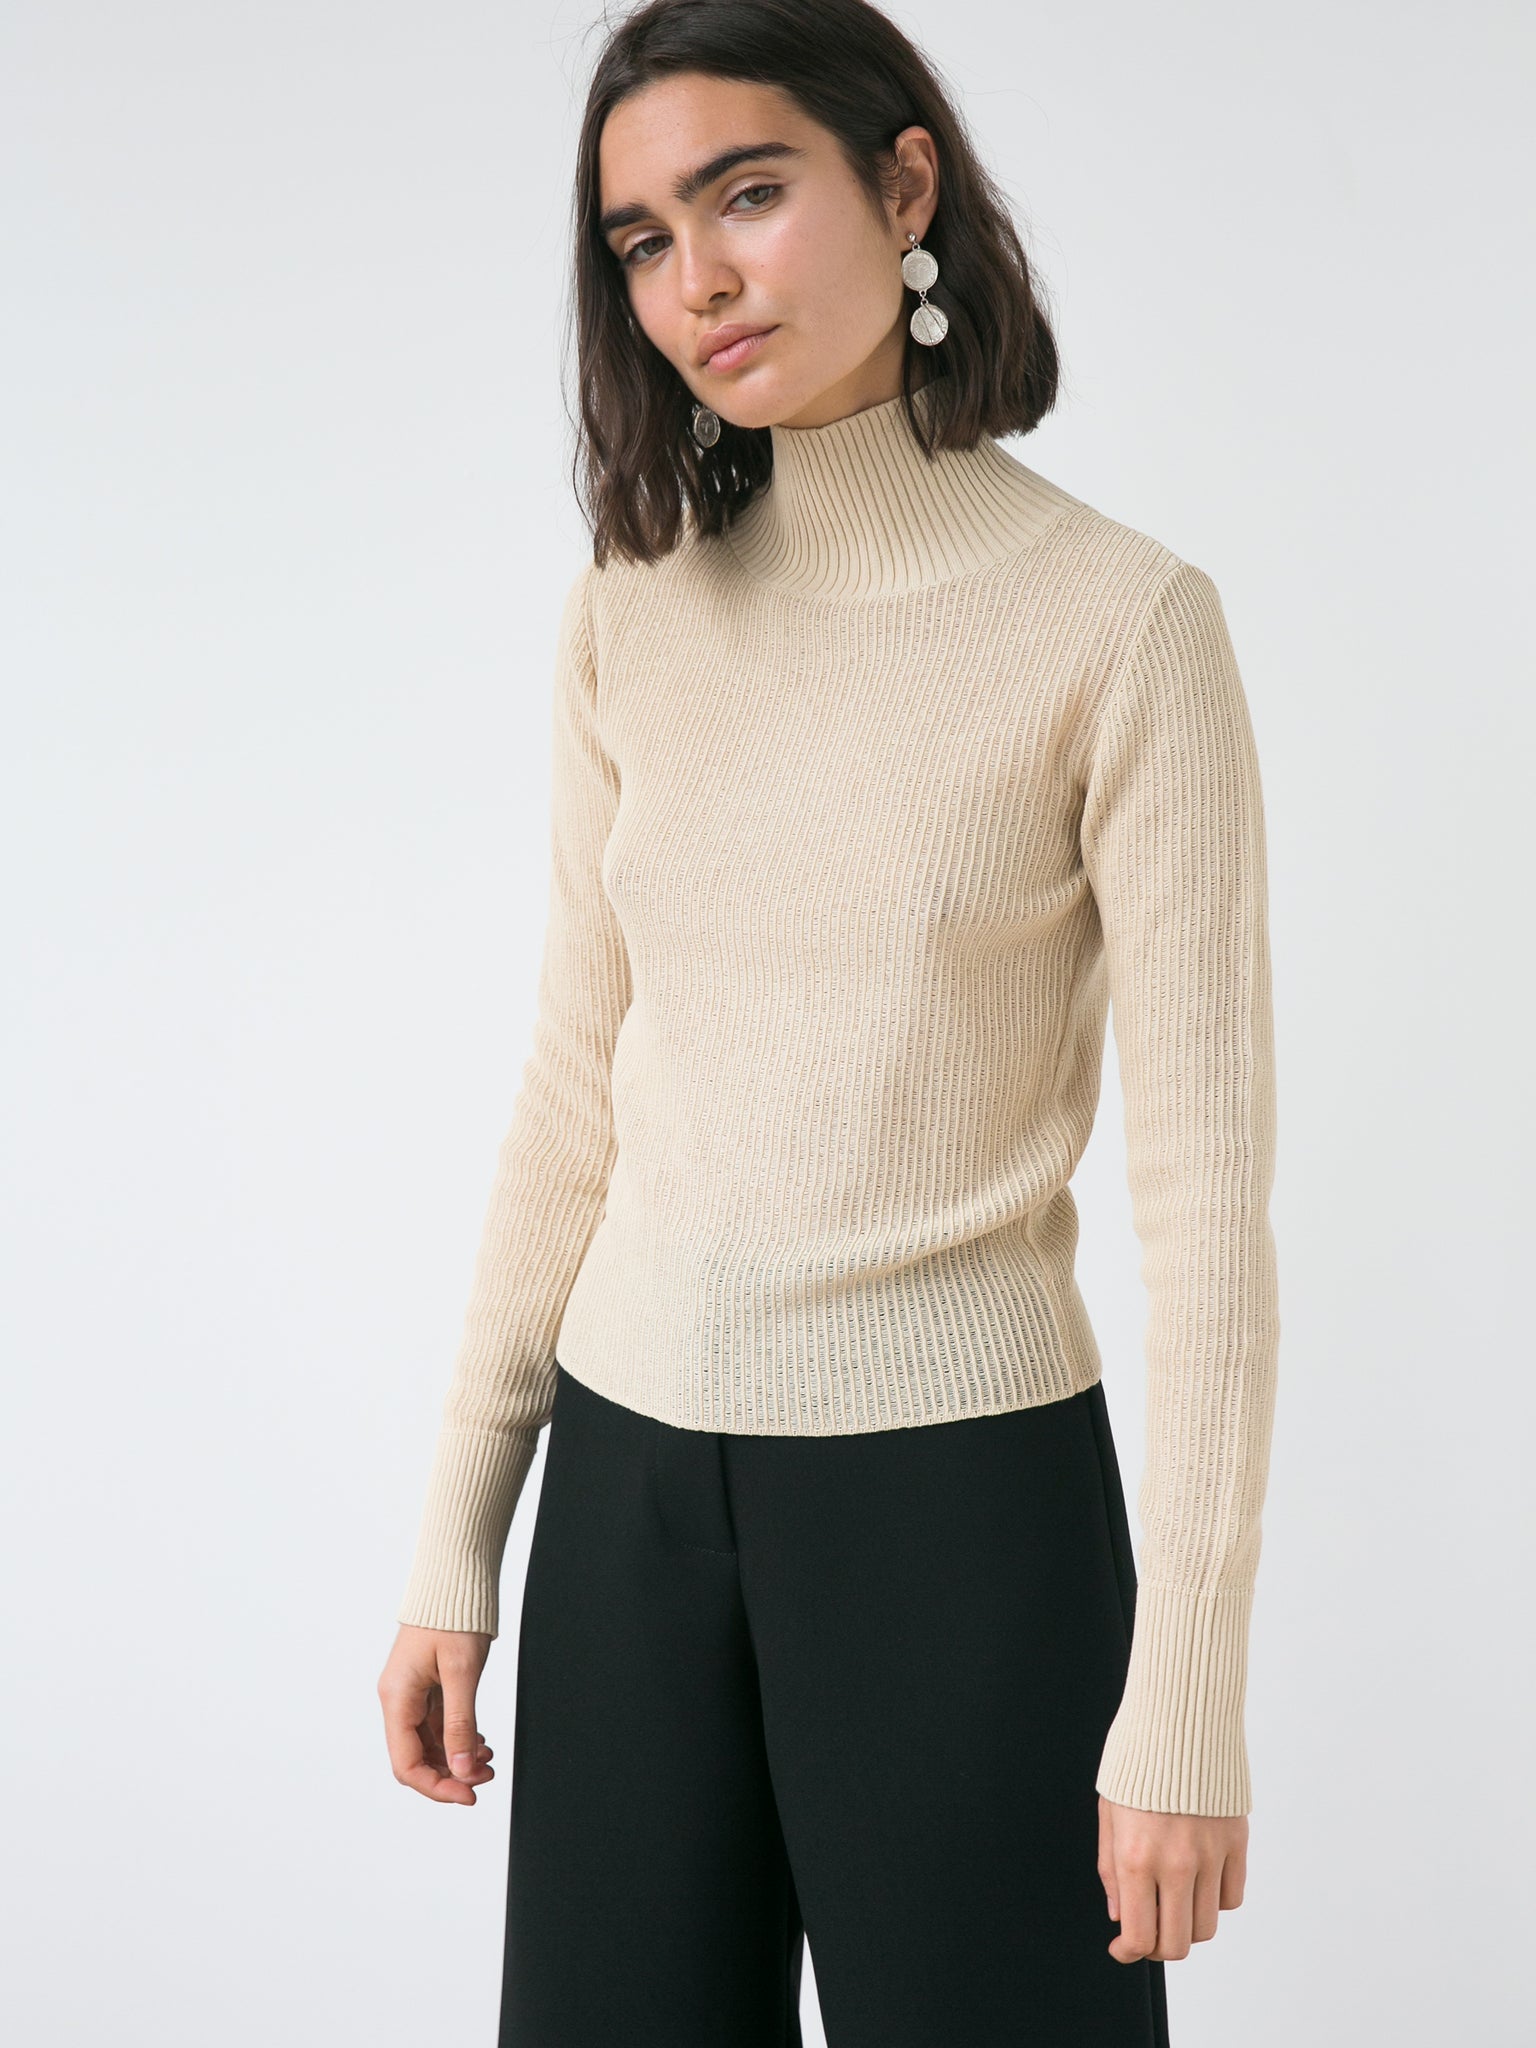 Sir The Label | Indi High Neck Sweater in Bone | The UNDONE by SIR.